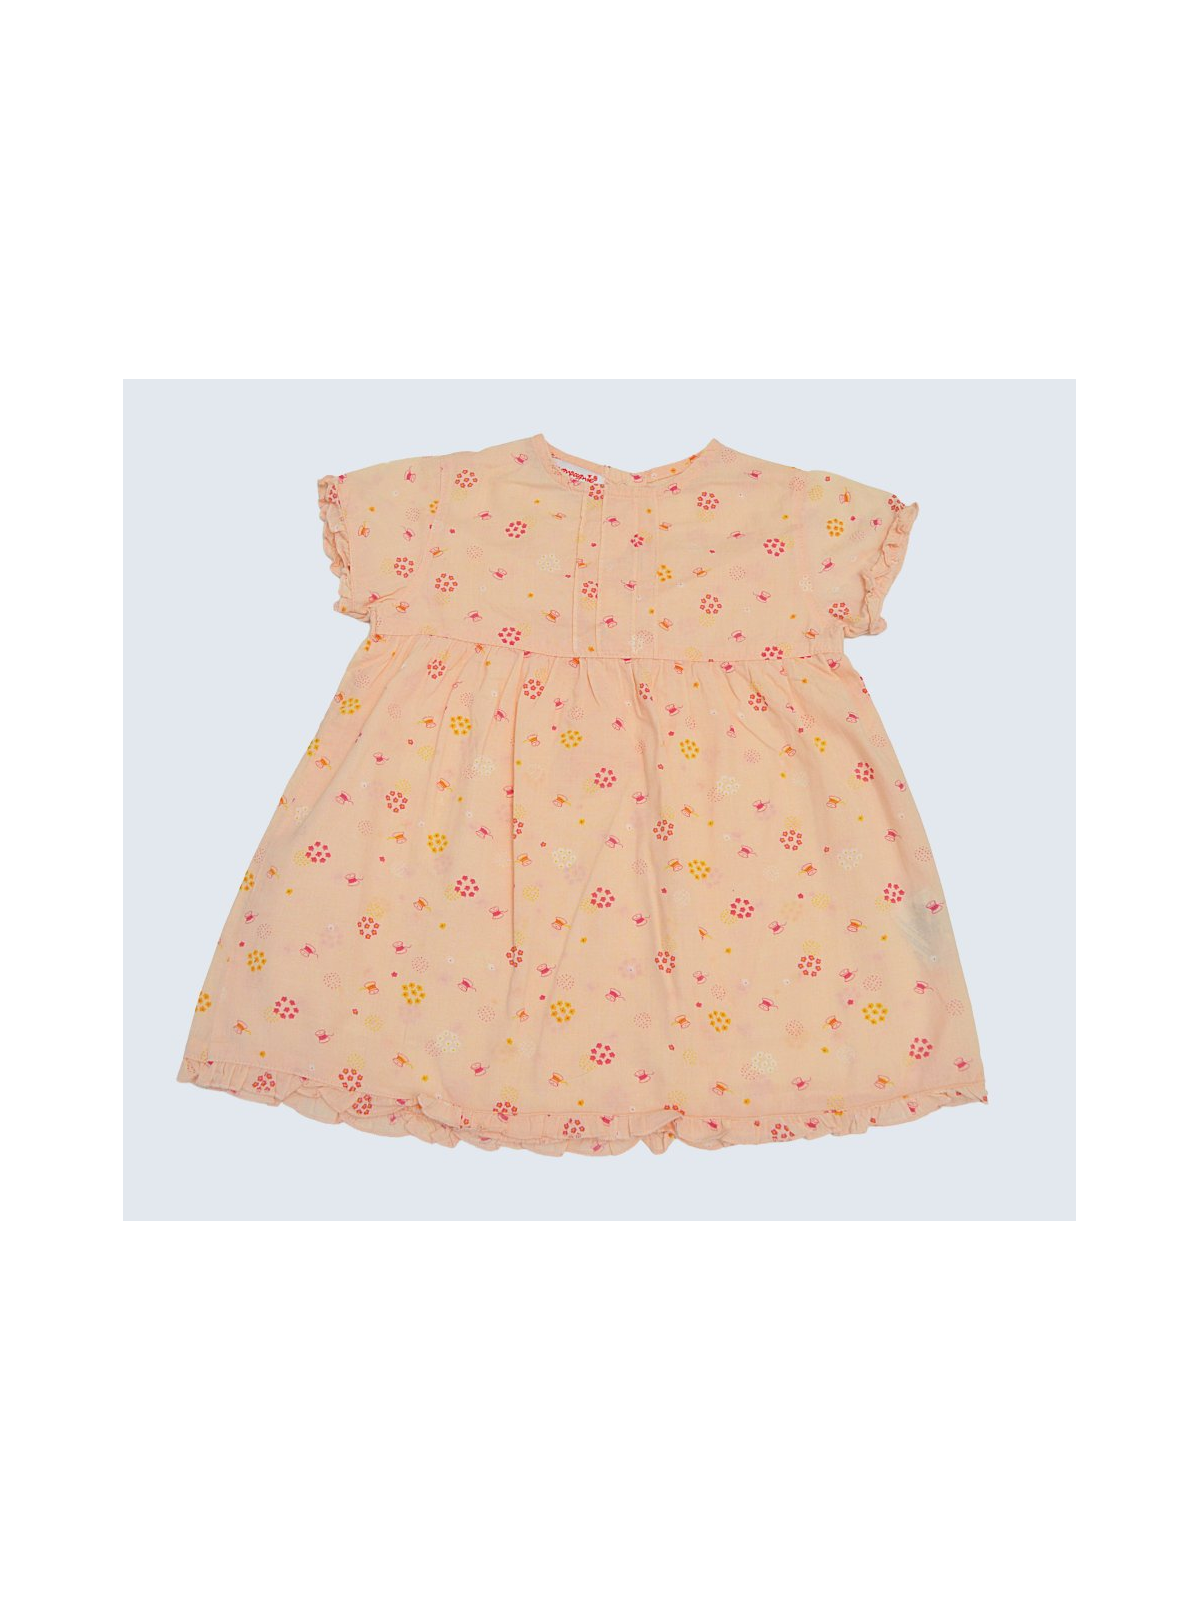 Robe d'occasion LCDP 9 Mois pour fille.